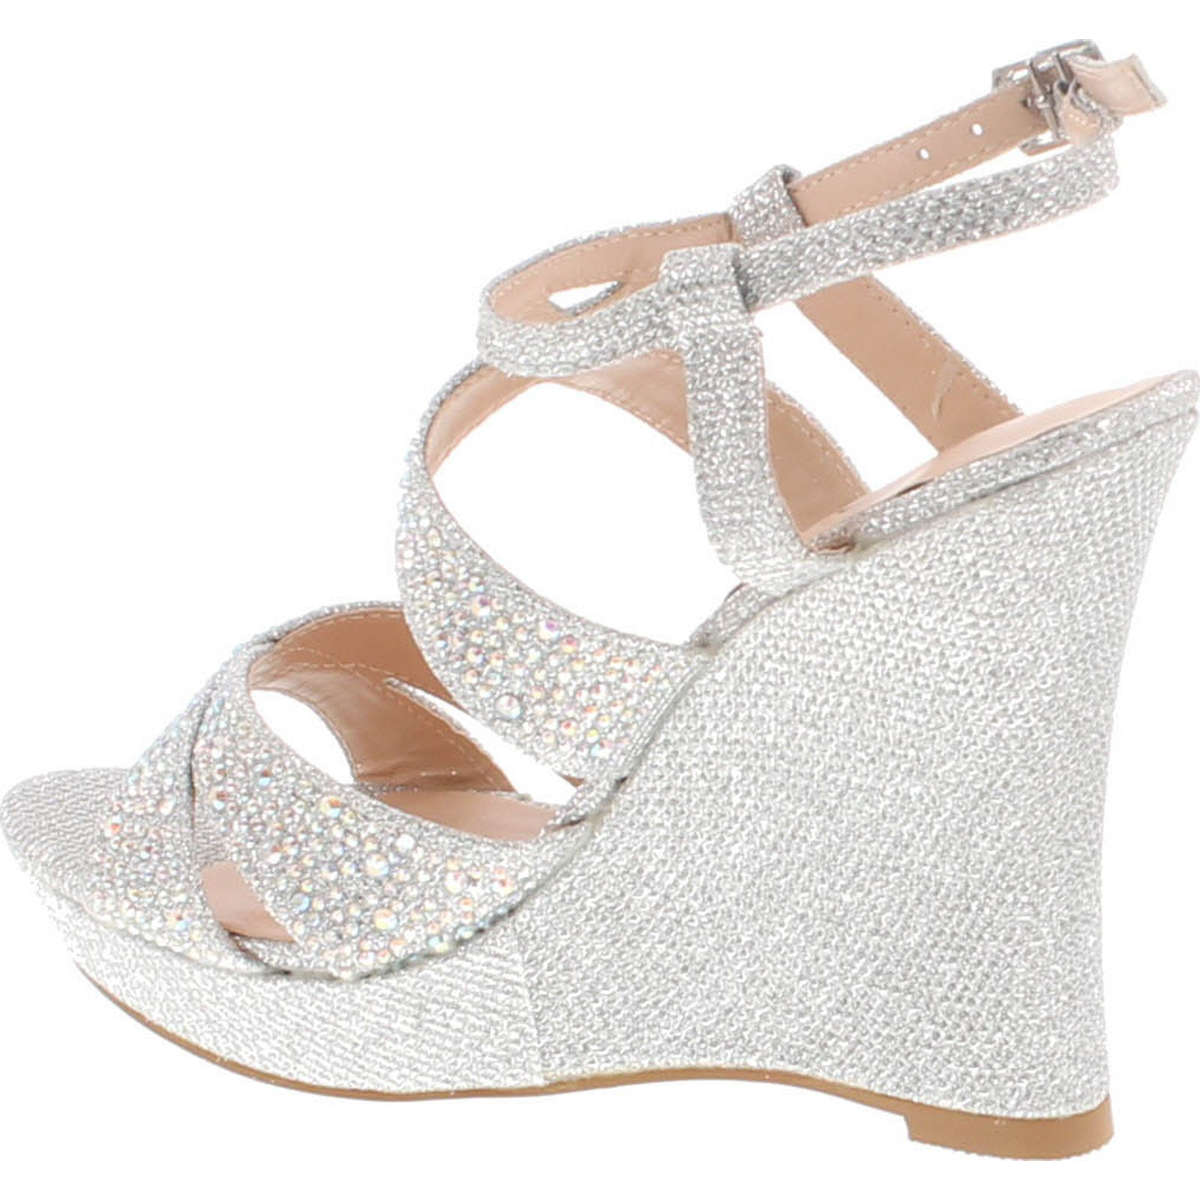 Static Footwear De Blossom Alle-8 High Heel Wedge Sandal With Crystal Embellishment Style Balle8